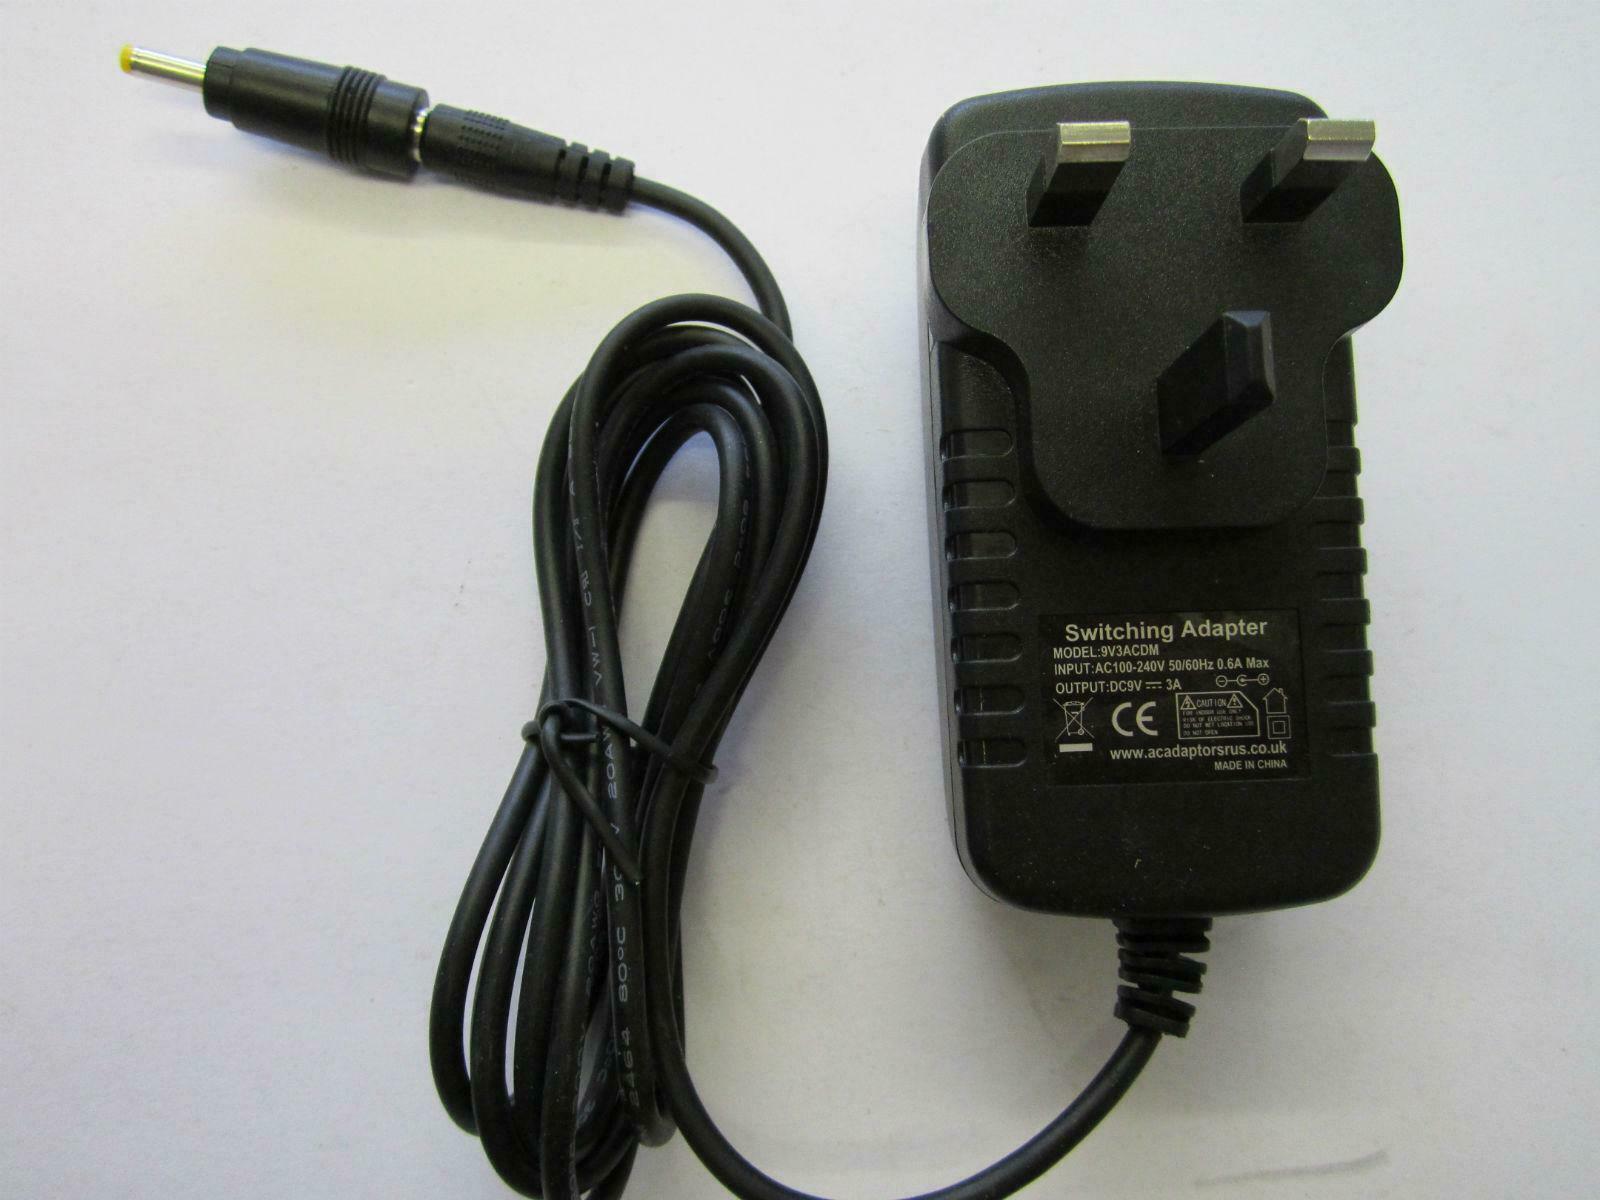 9V 2.5A Switching Adapter Charger for qsyn-mi004-2.2 4 10 inch Q Media Tablet This is your Chance to Purchase this Bra